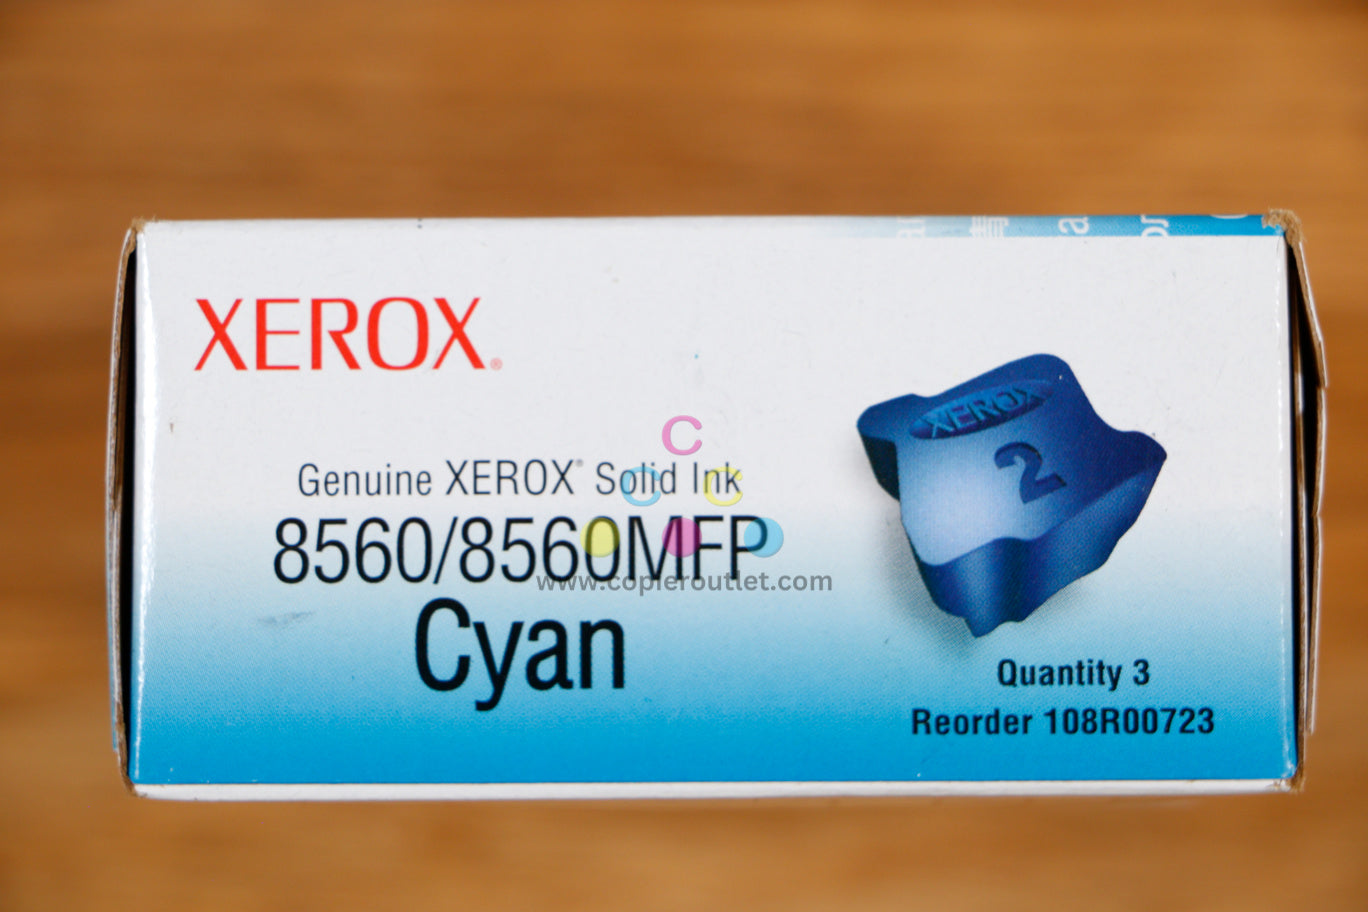 Genuine Xerox Phaser Cyan Solid Ink Phaser 8560MFP 8560MFP 108R00723 Same Day!!!